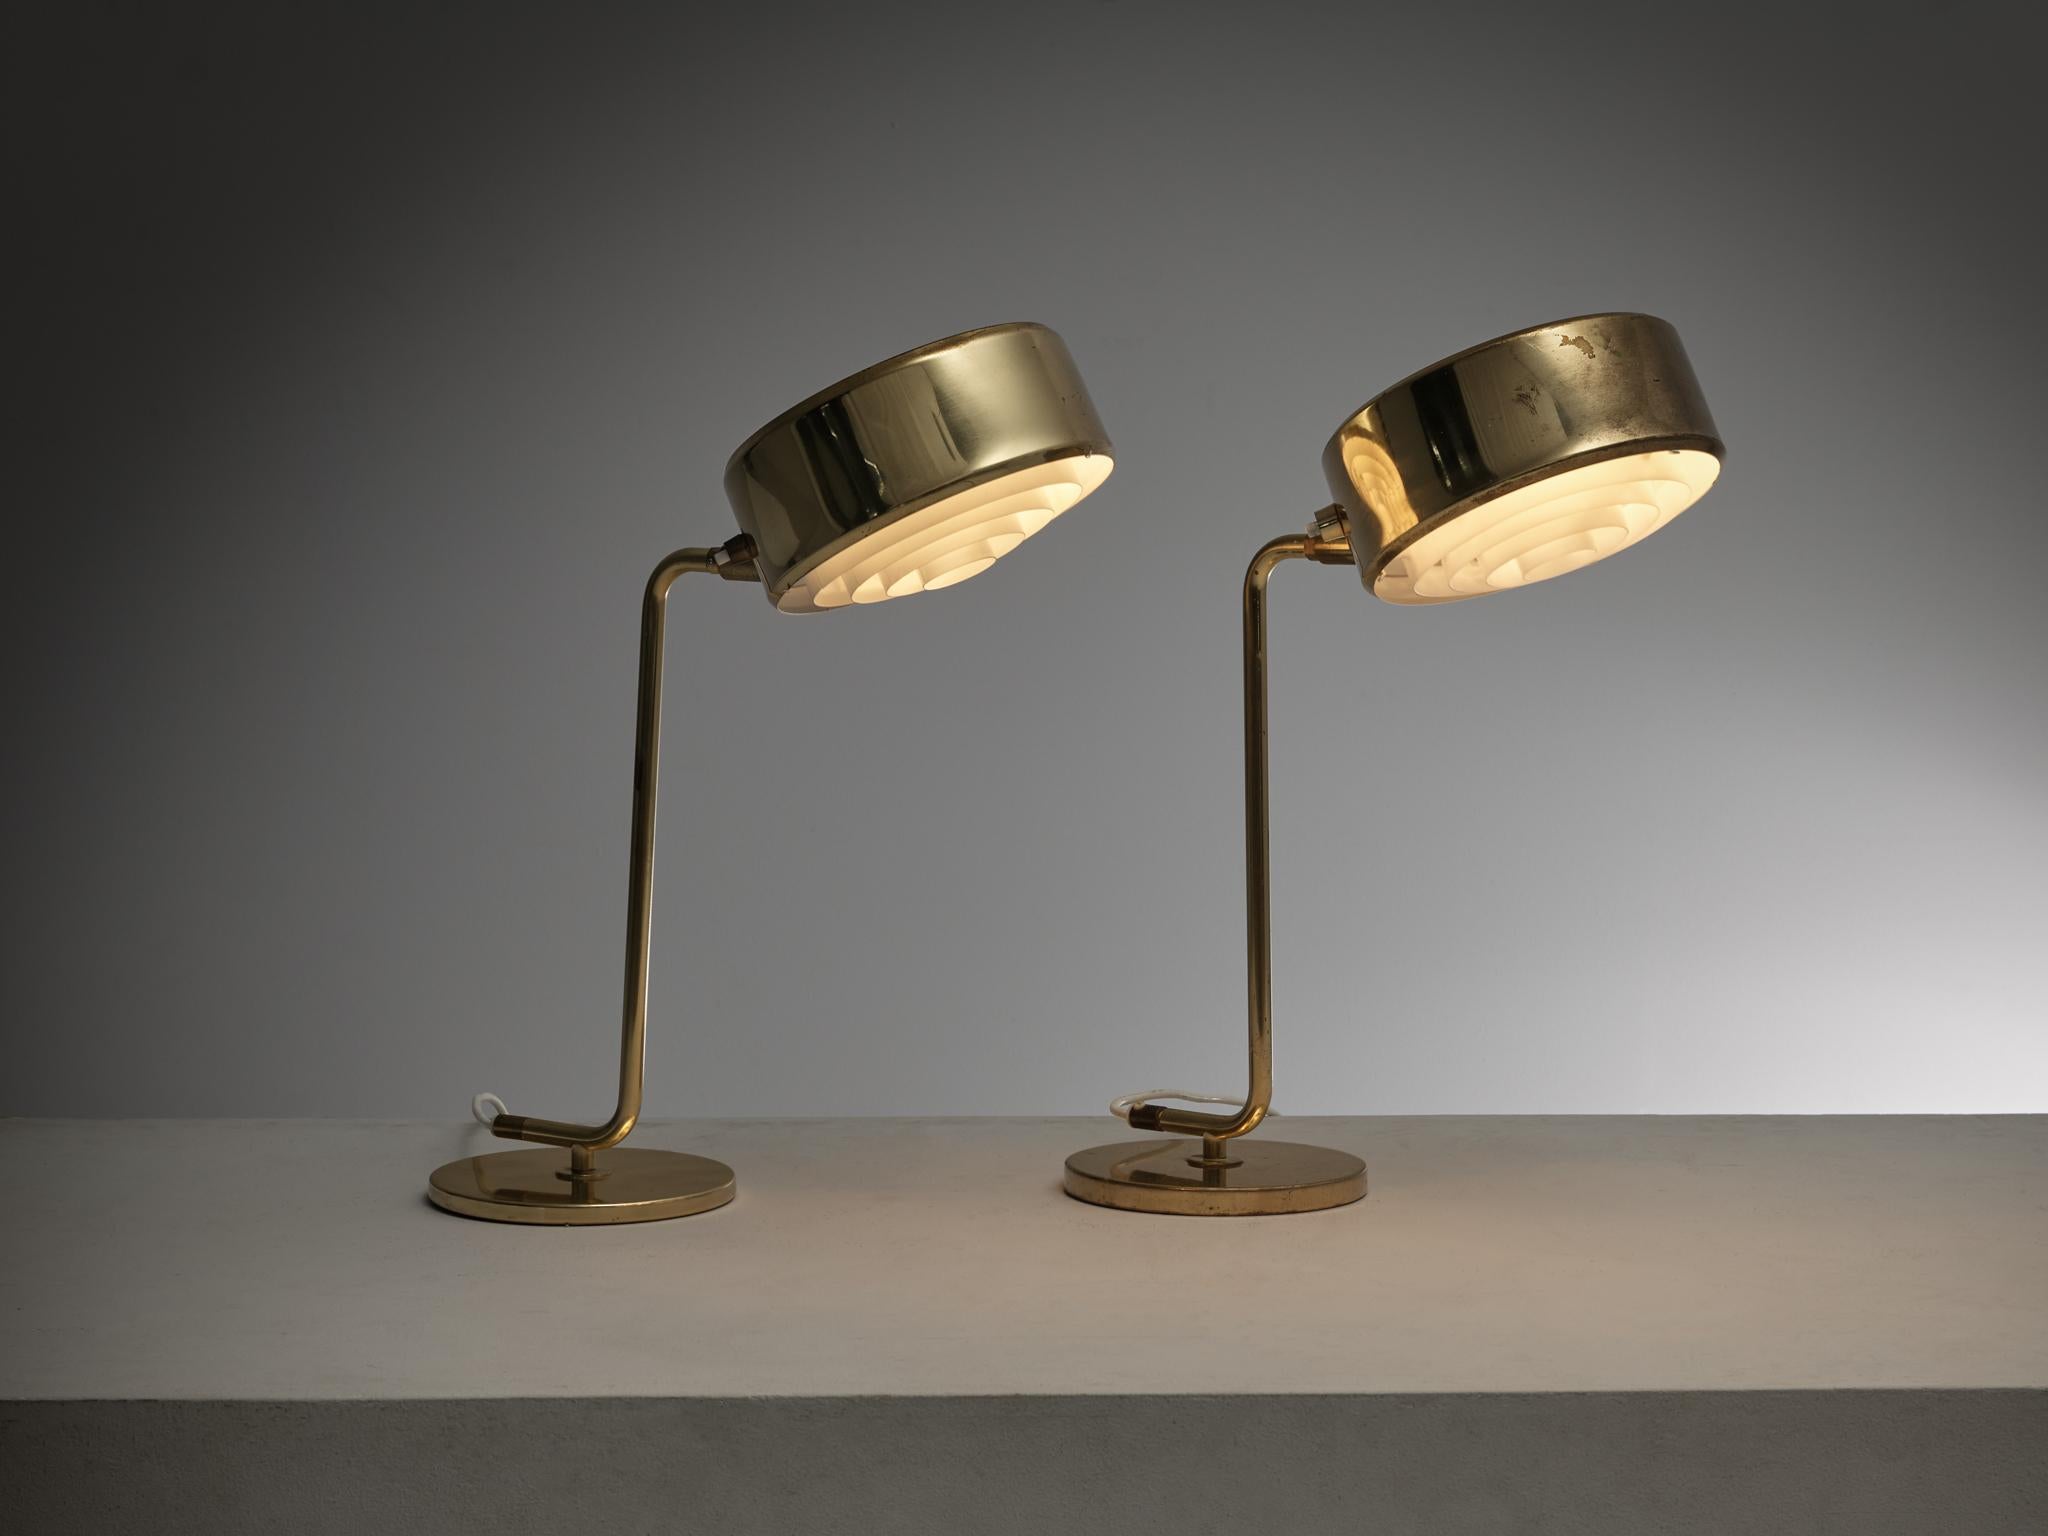 Anders Pehrson for Atelje´Lyktan, table or desk lamp, 'Olympic', brass, Sweden, 1972

Pair of 'Olympic' table lights by Anders Pehrson for Atelje´Lyktan. This outstanding desk or table lamp was designed for the Olympic village of the 1972 Olympic